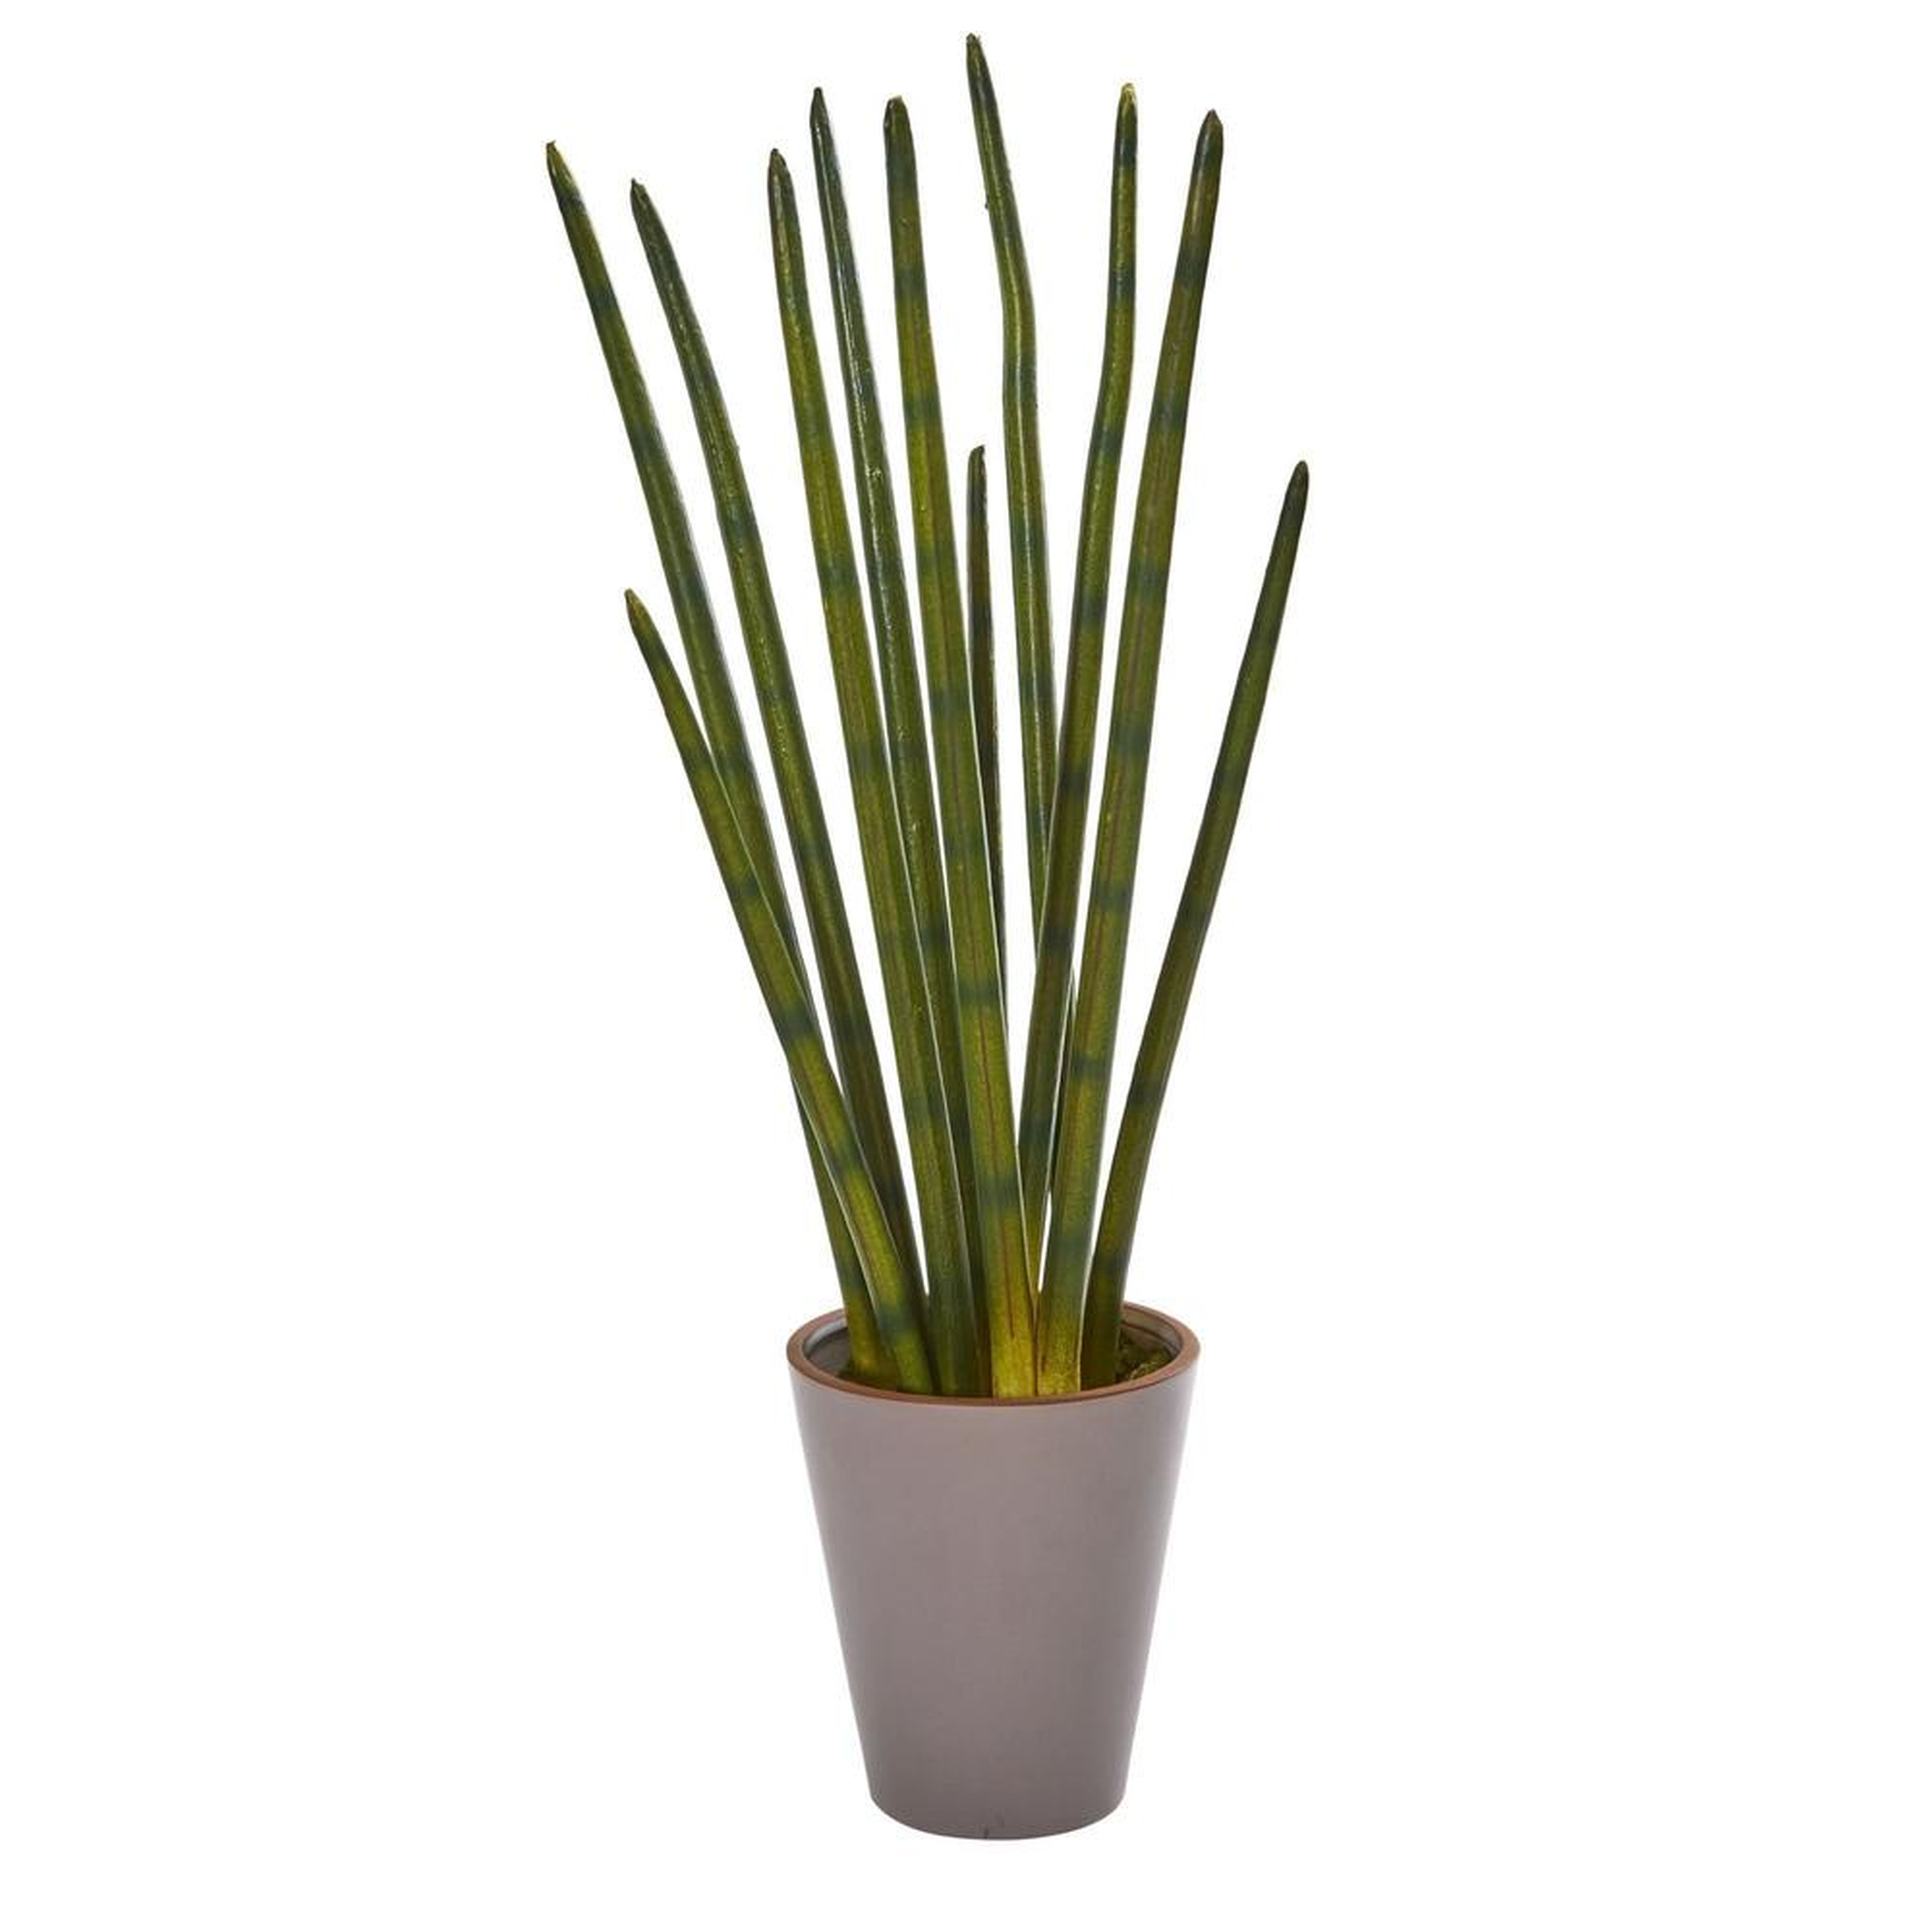 24” Bamboo Shoot Artificial Plant in Decorative Planter - Fiddle + Bloom